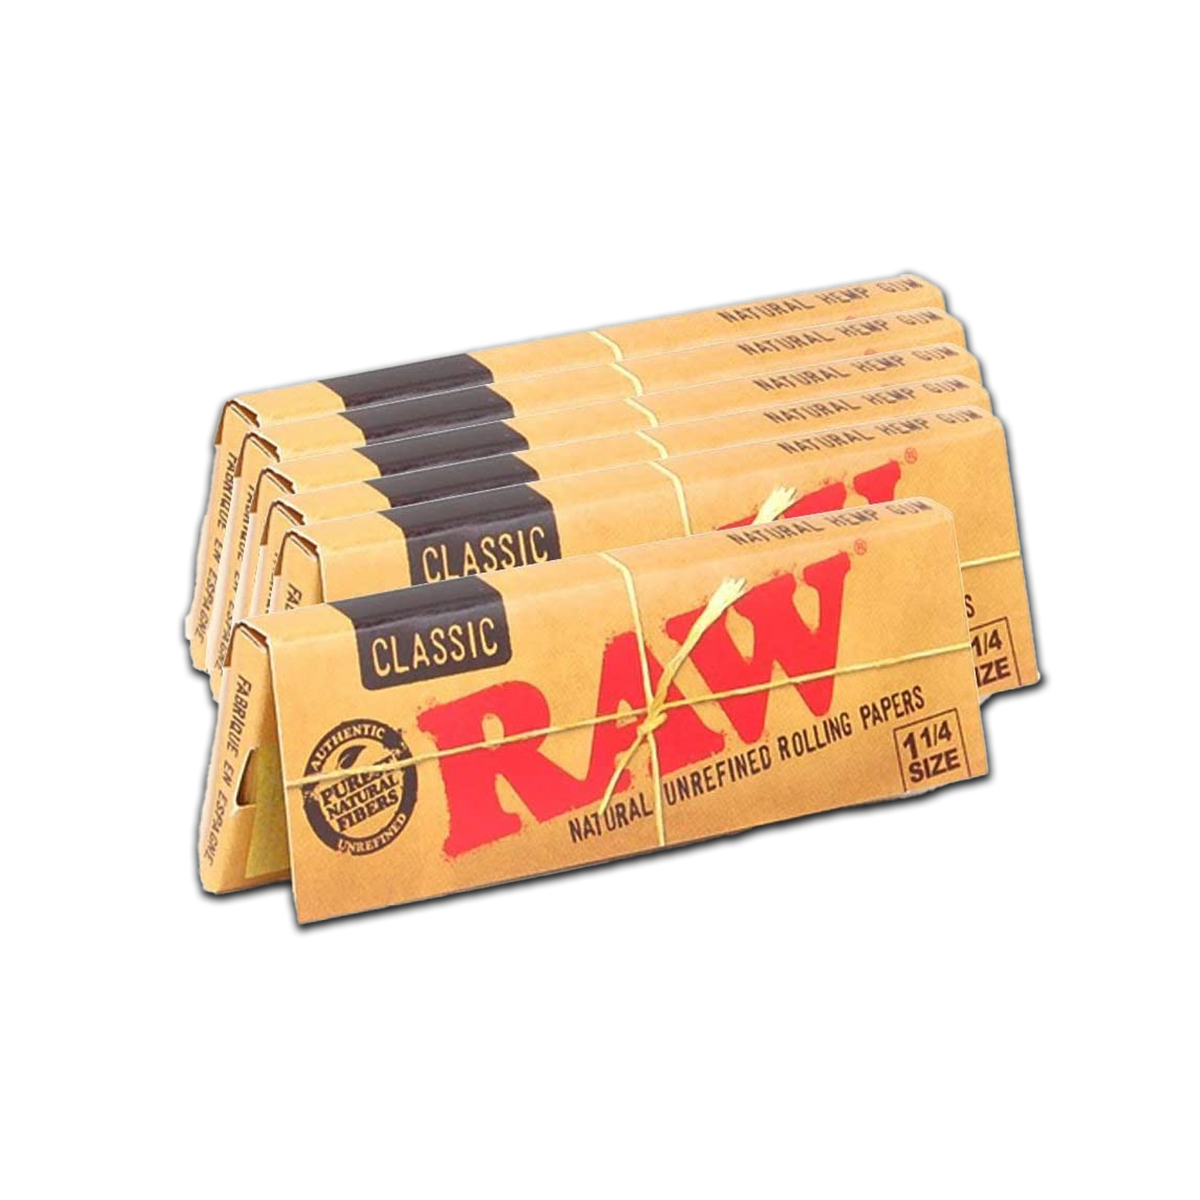 RAW Classic 1 1/4 Rolling Papers (Pack of 6)